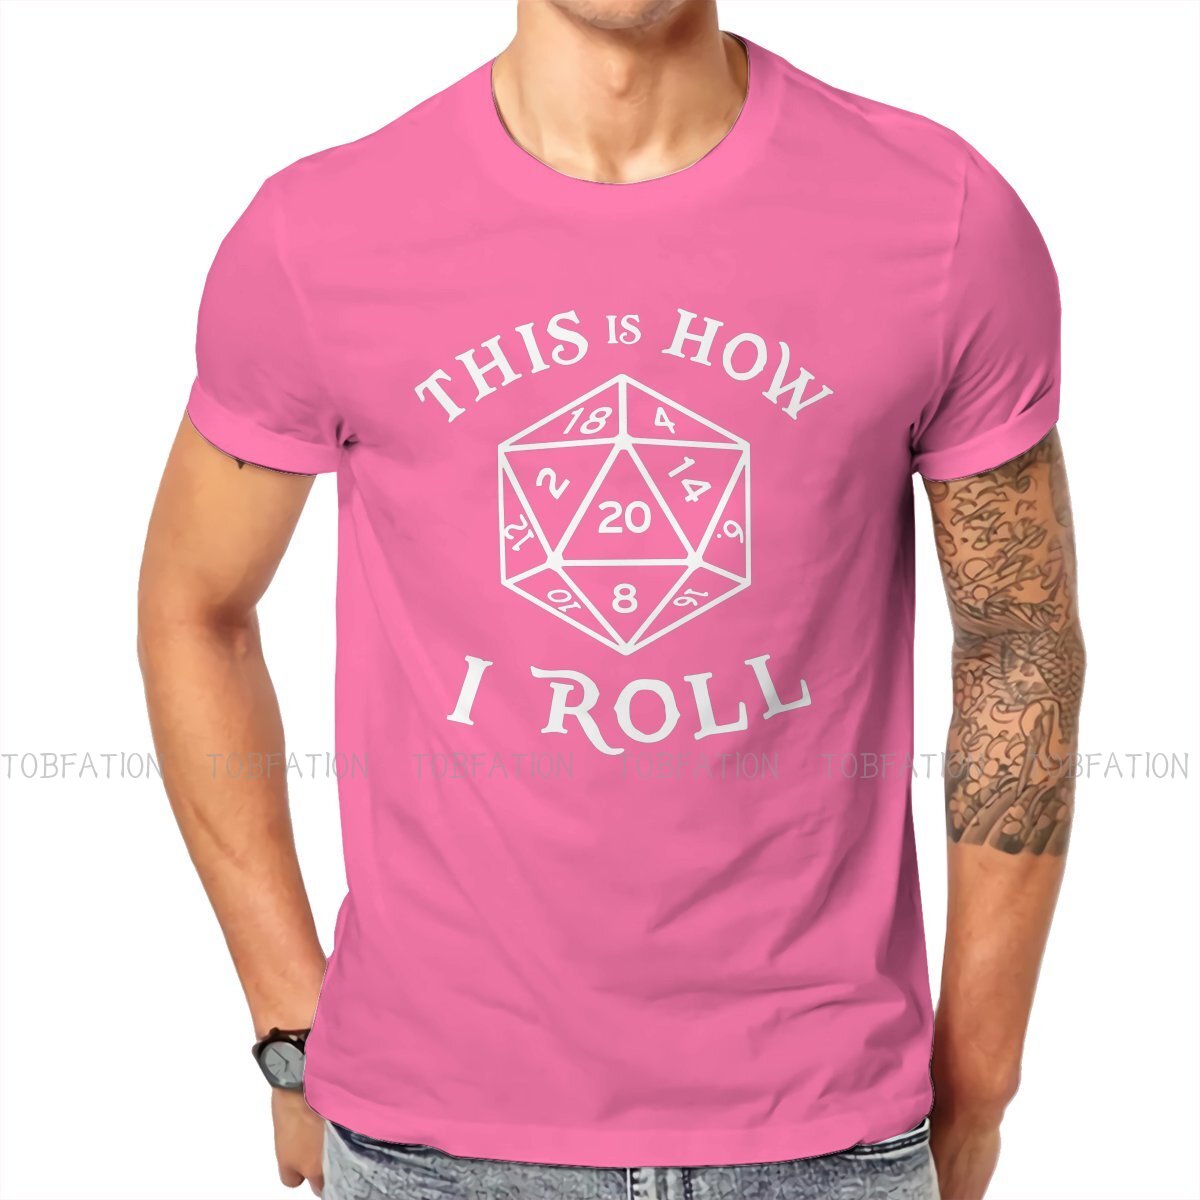 This is How I Roll Dice TShirt S-6XL